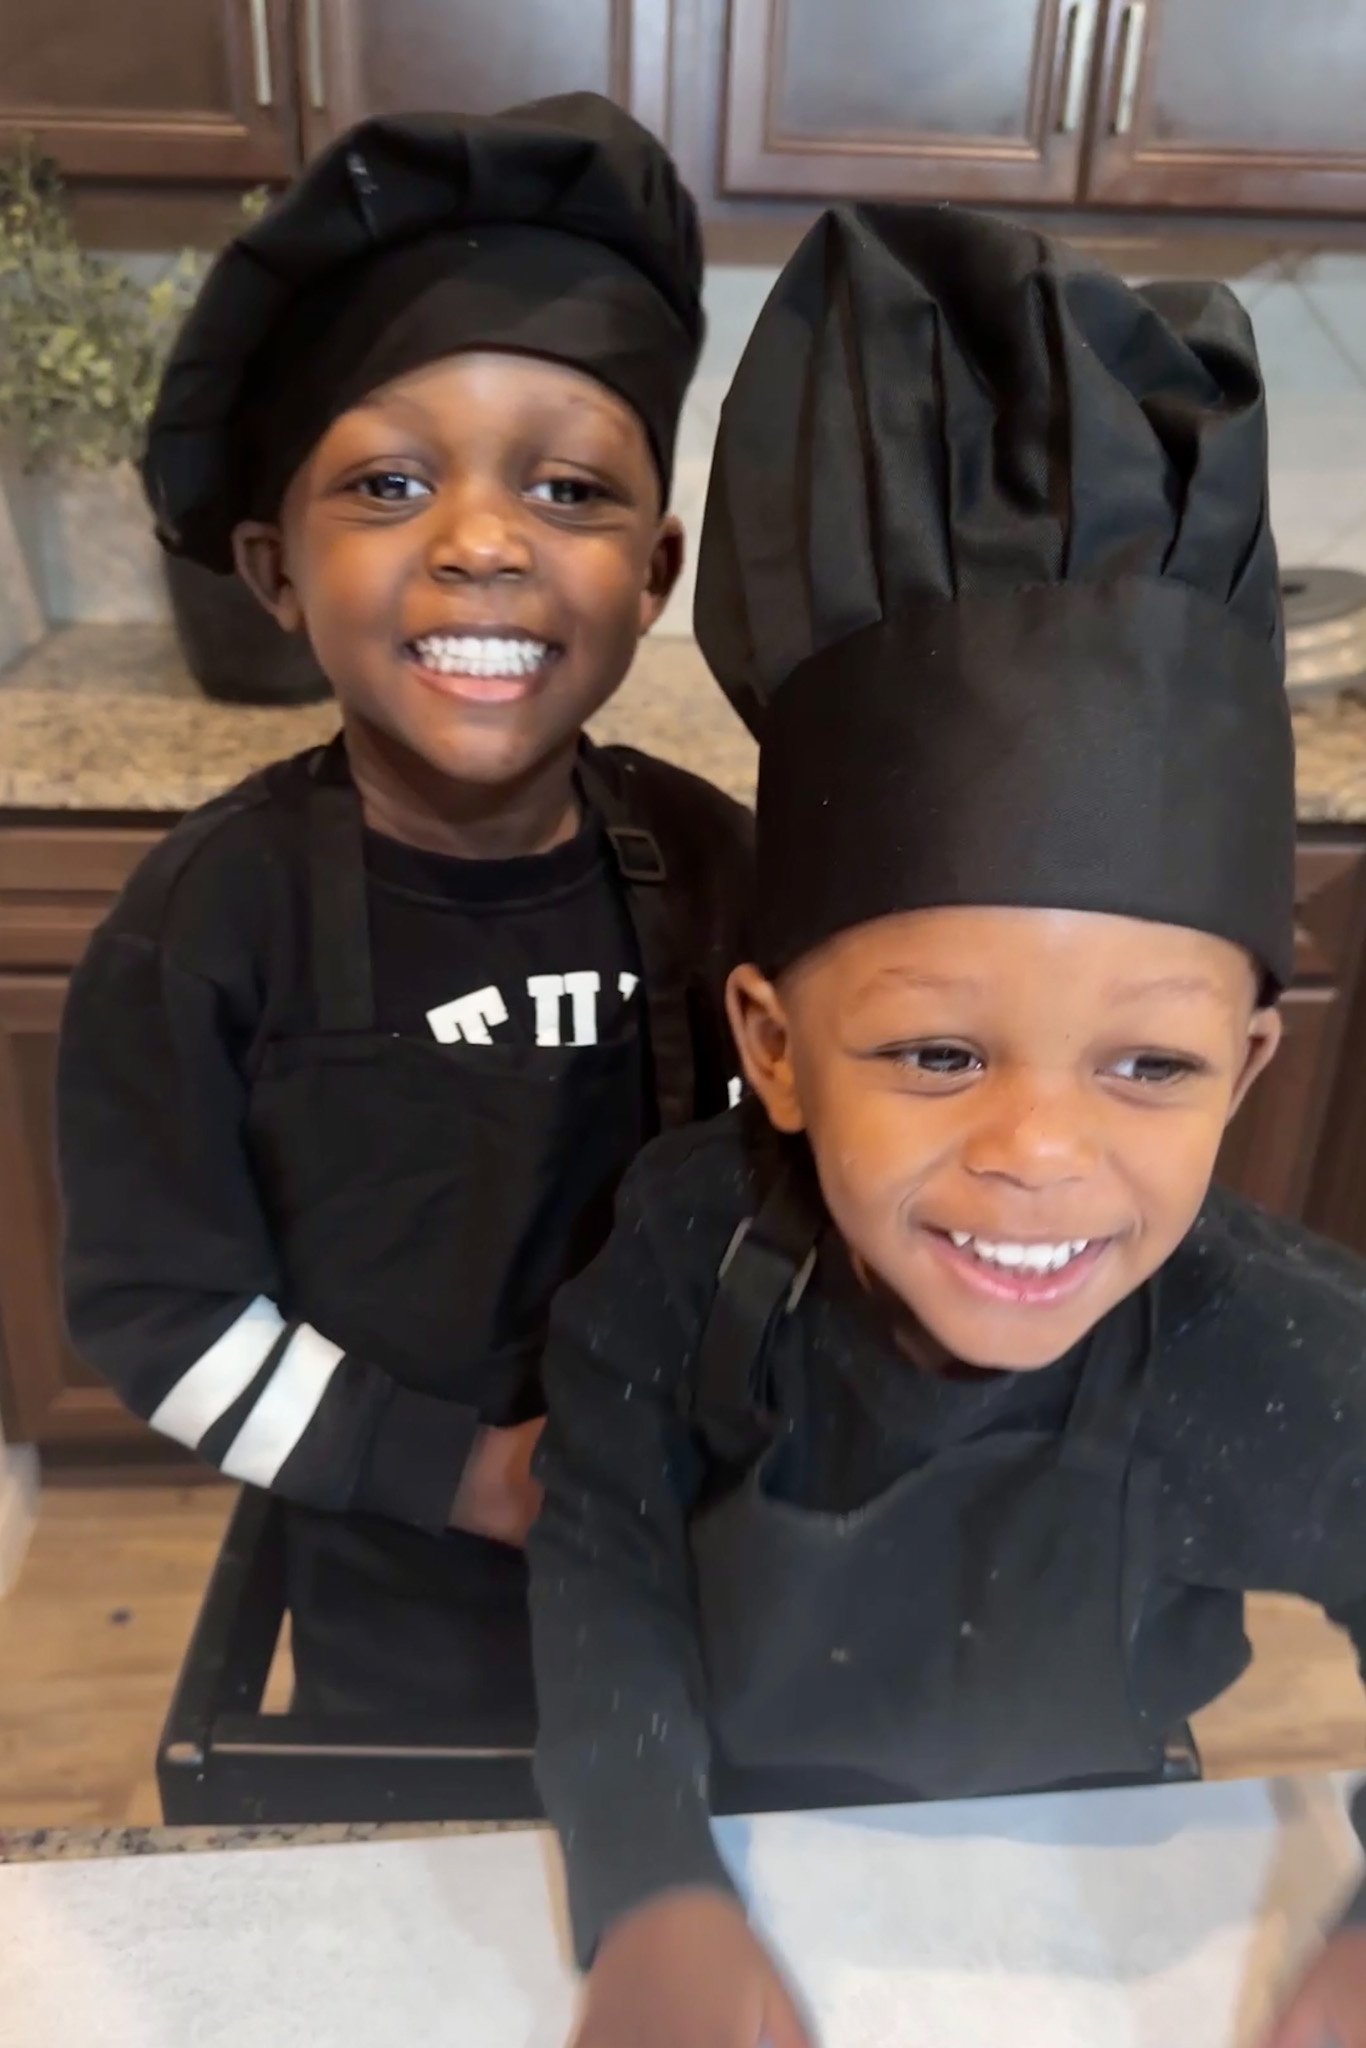 Toddler boys wearing chef hats.